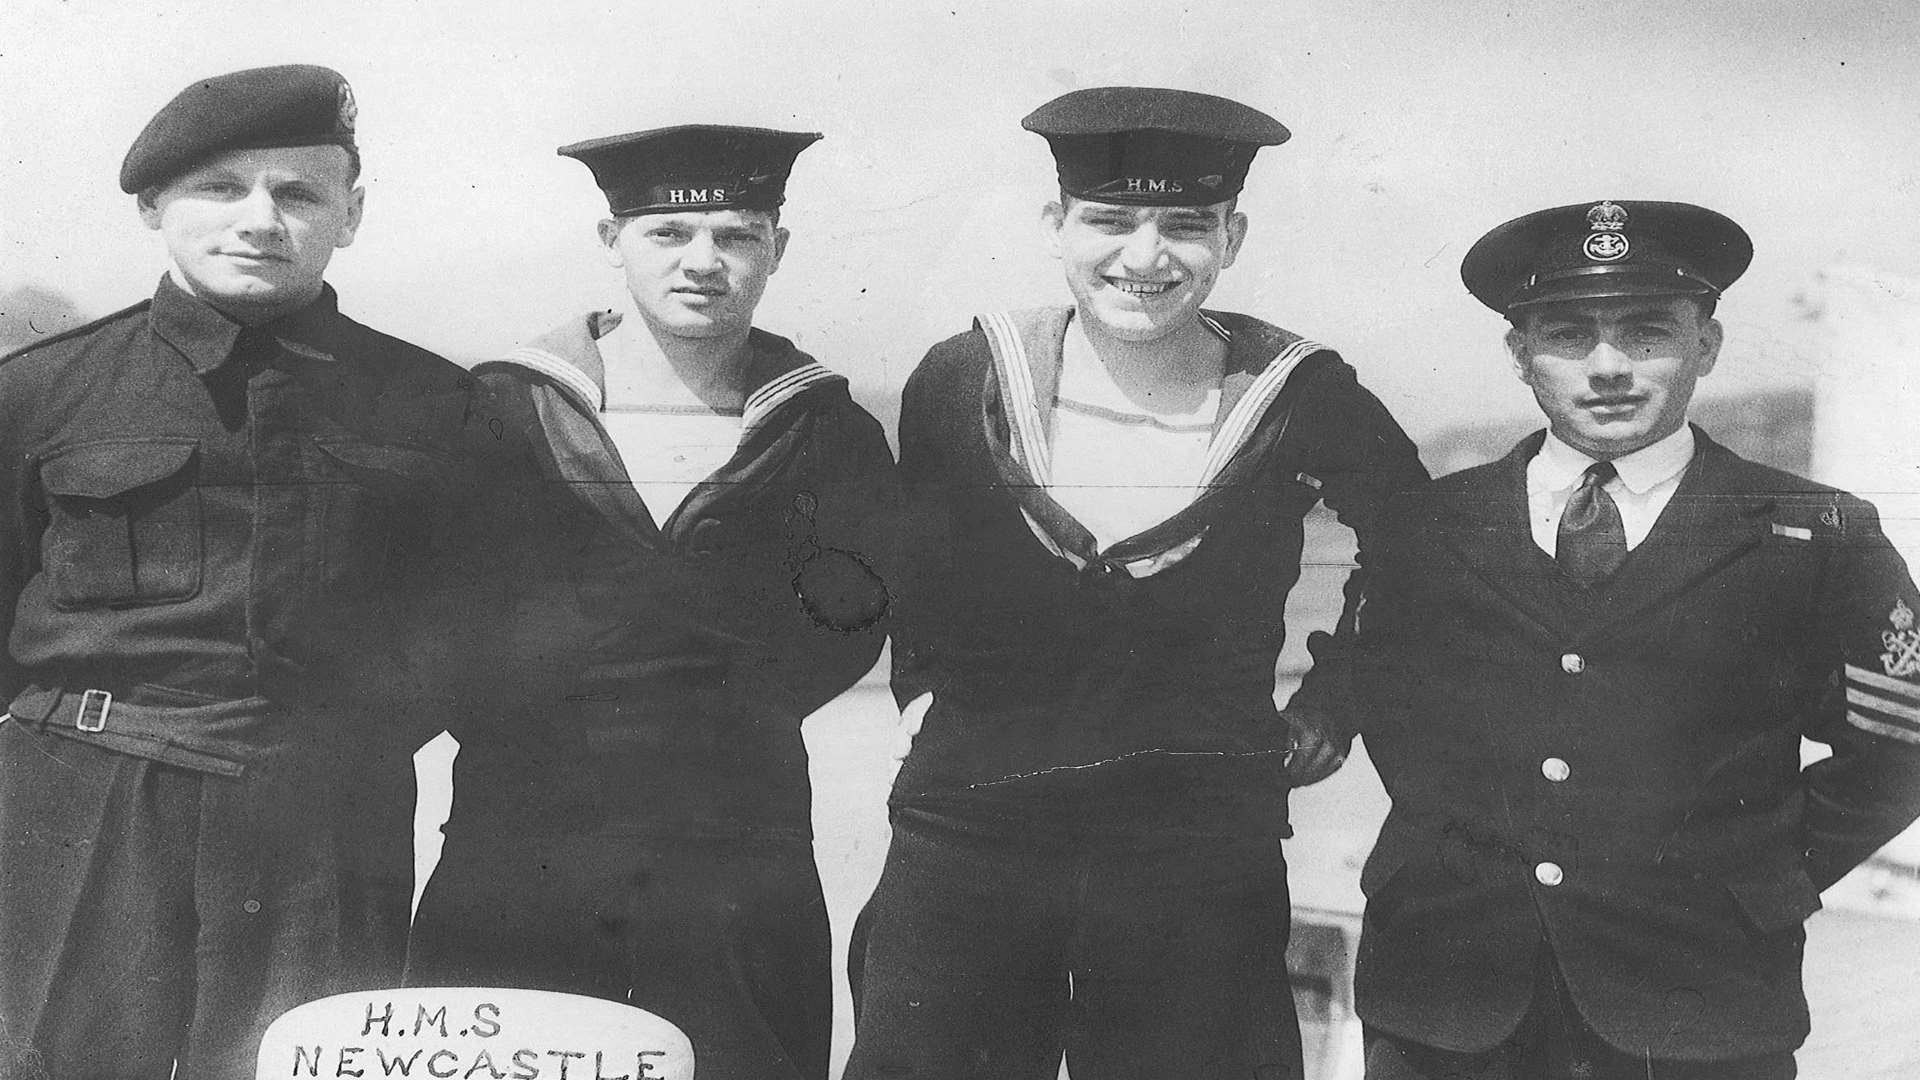 Arthur Woodyet (far left) served on the Russian Arctic convoys on HMS Newcastle during the Second World War and was awarded by the Ushakov Medal at the Russian Embassy